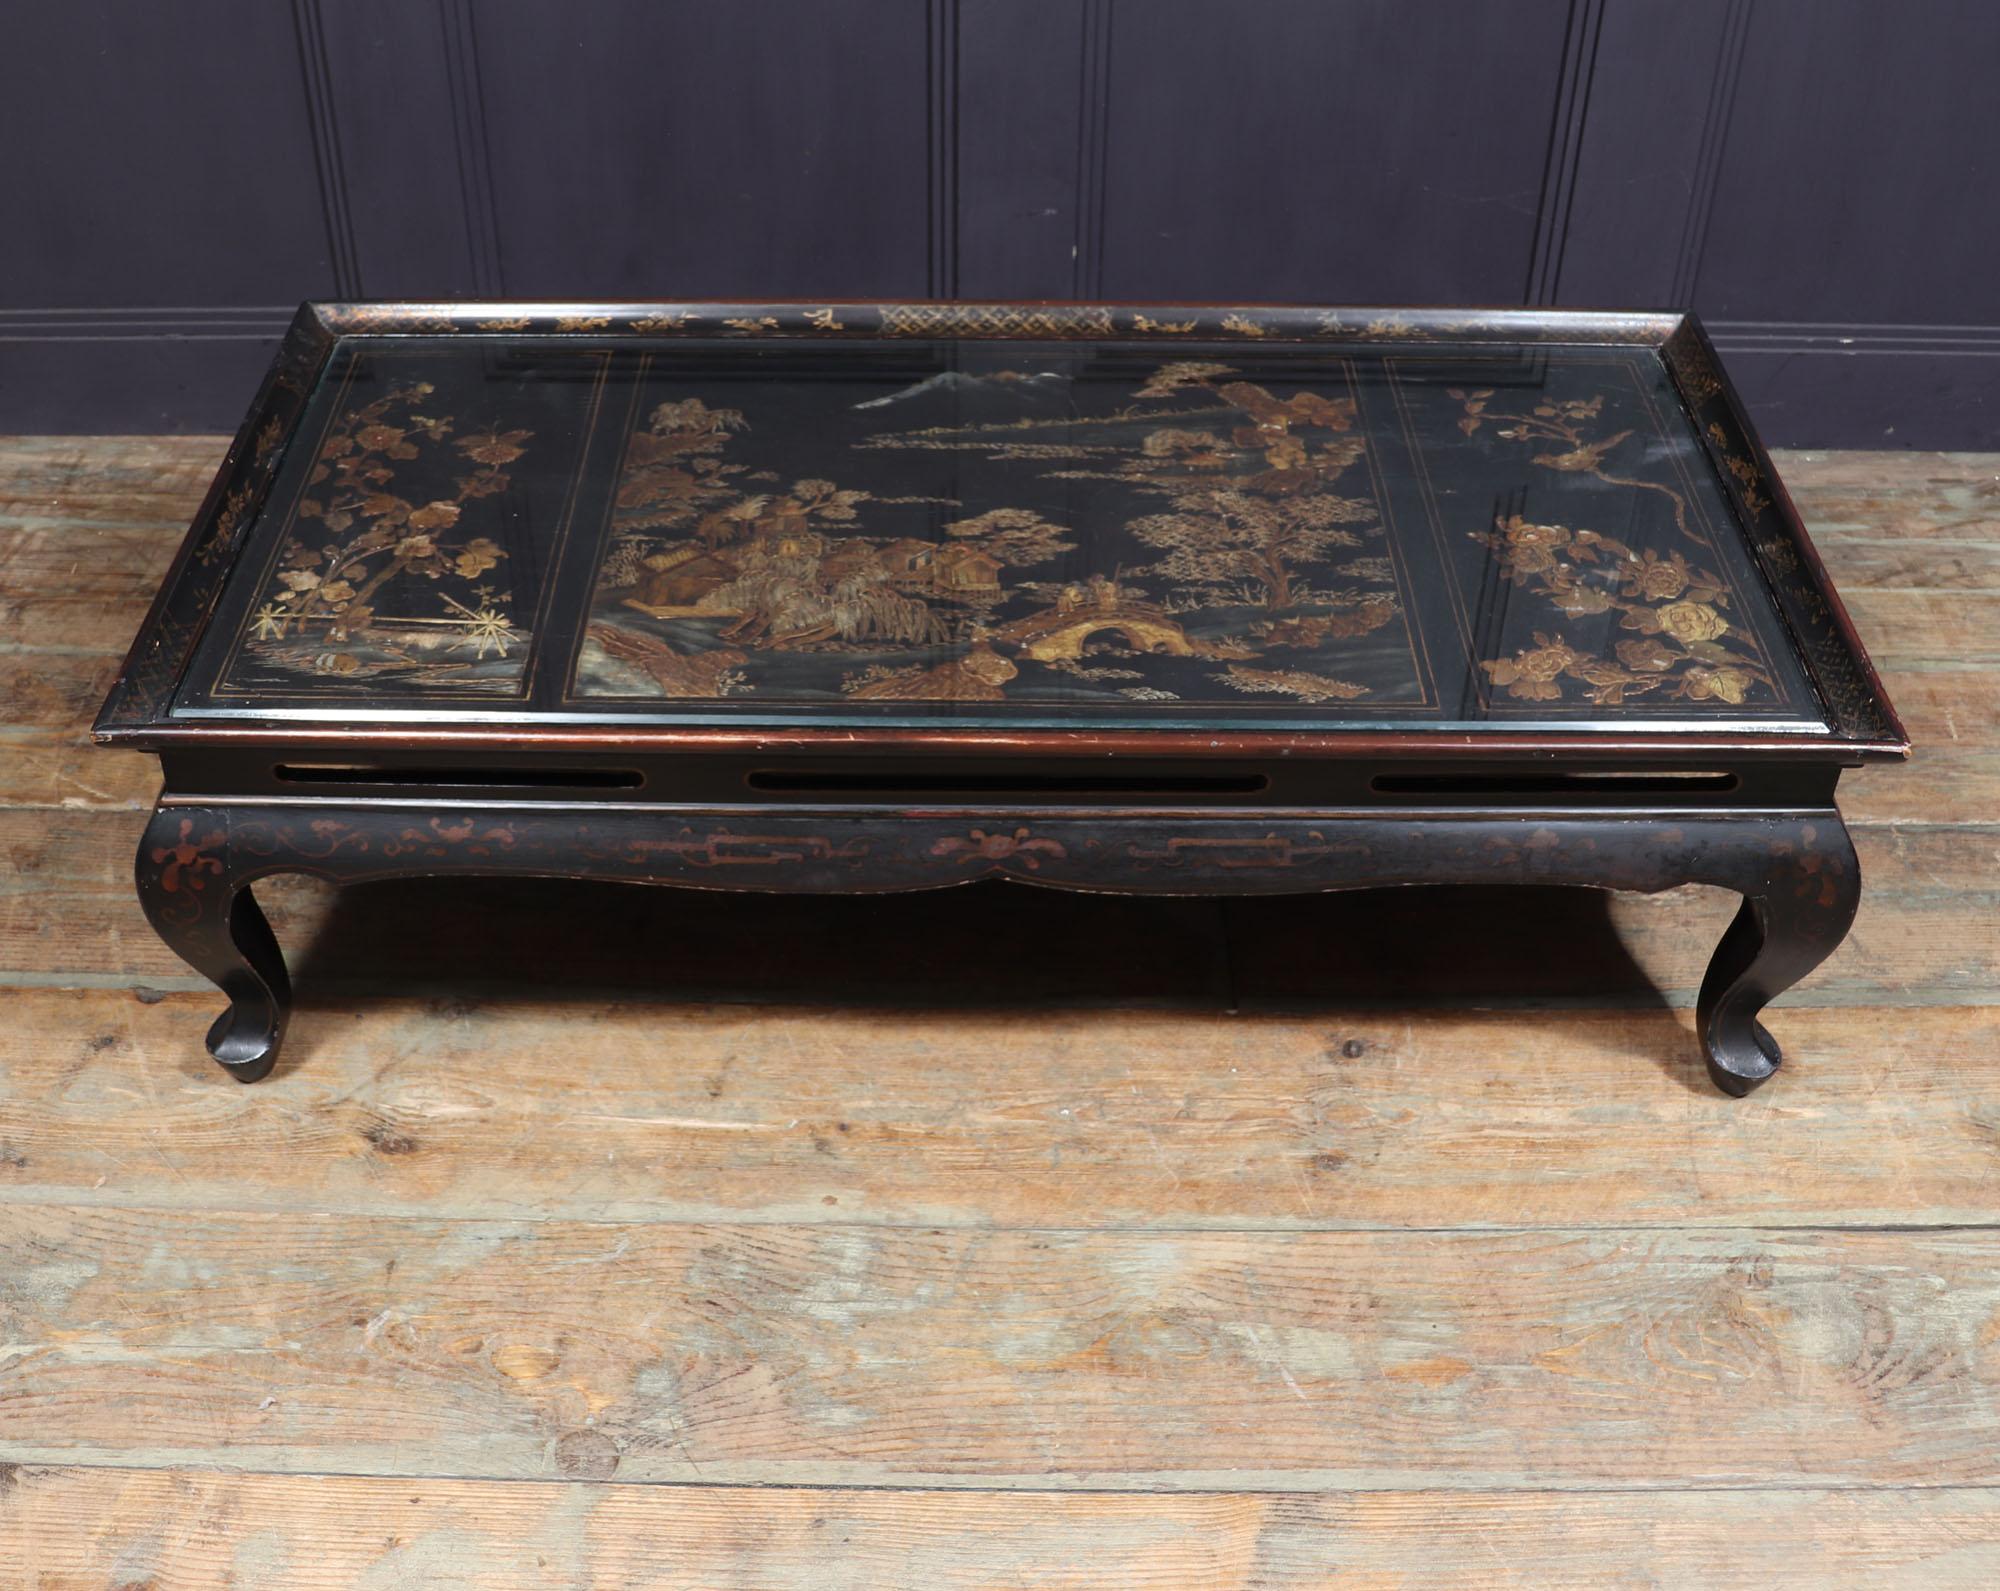 CHINESE KANG TABLE
This Chinoiserie Coffee Table is a stunning example. Featuring a stunning 1860 panel top, this coffee table brings a traditional Chinese look to any room. The Ming Style legs and gilt detail combine to create a timeless design